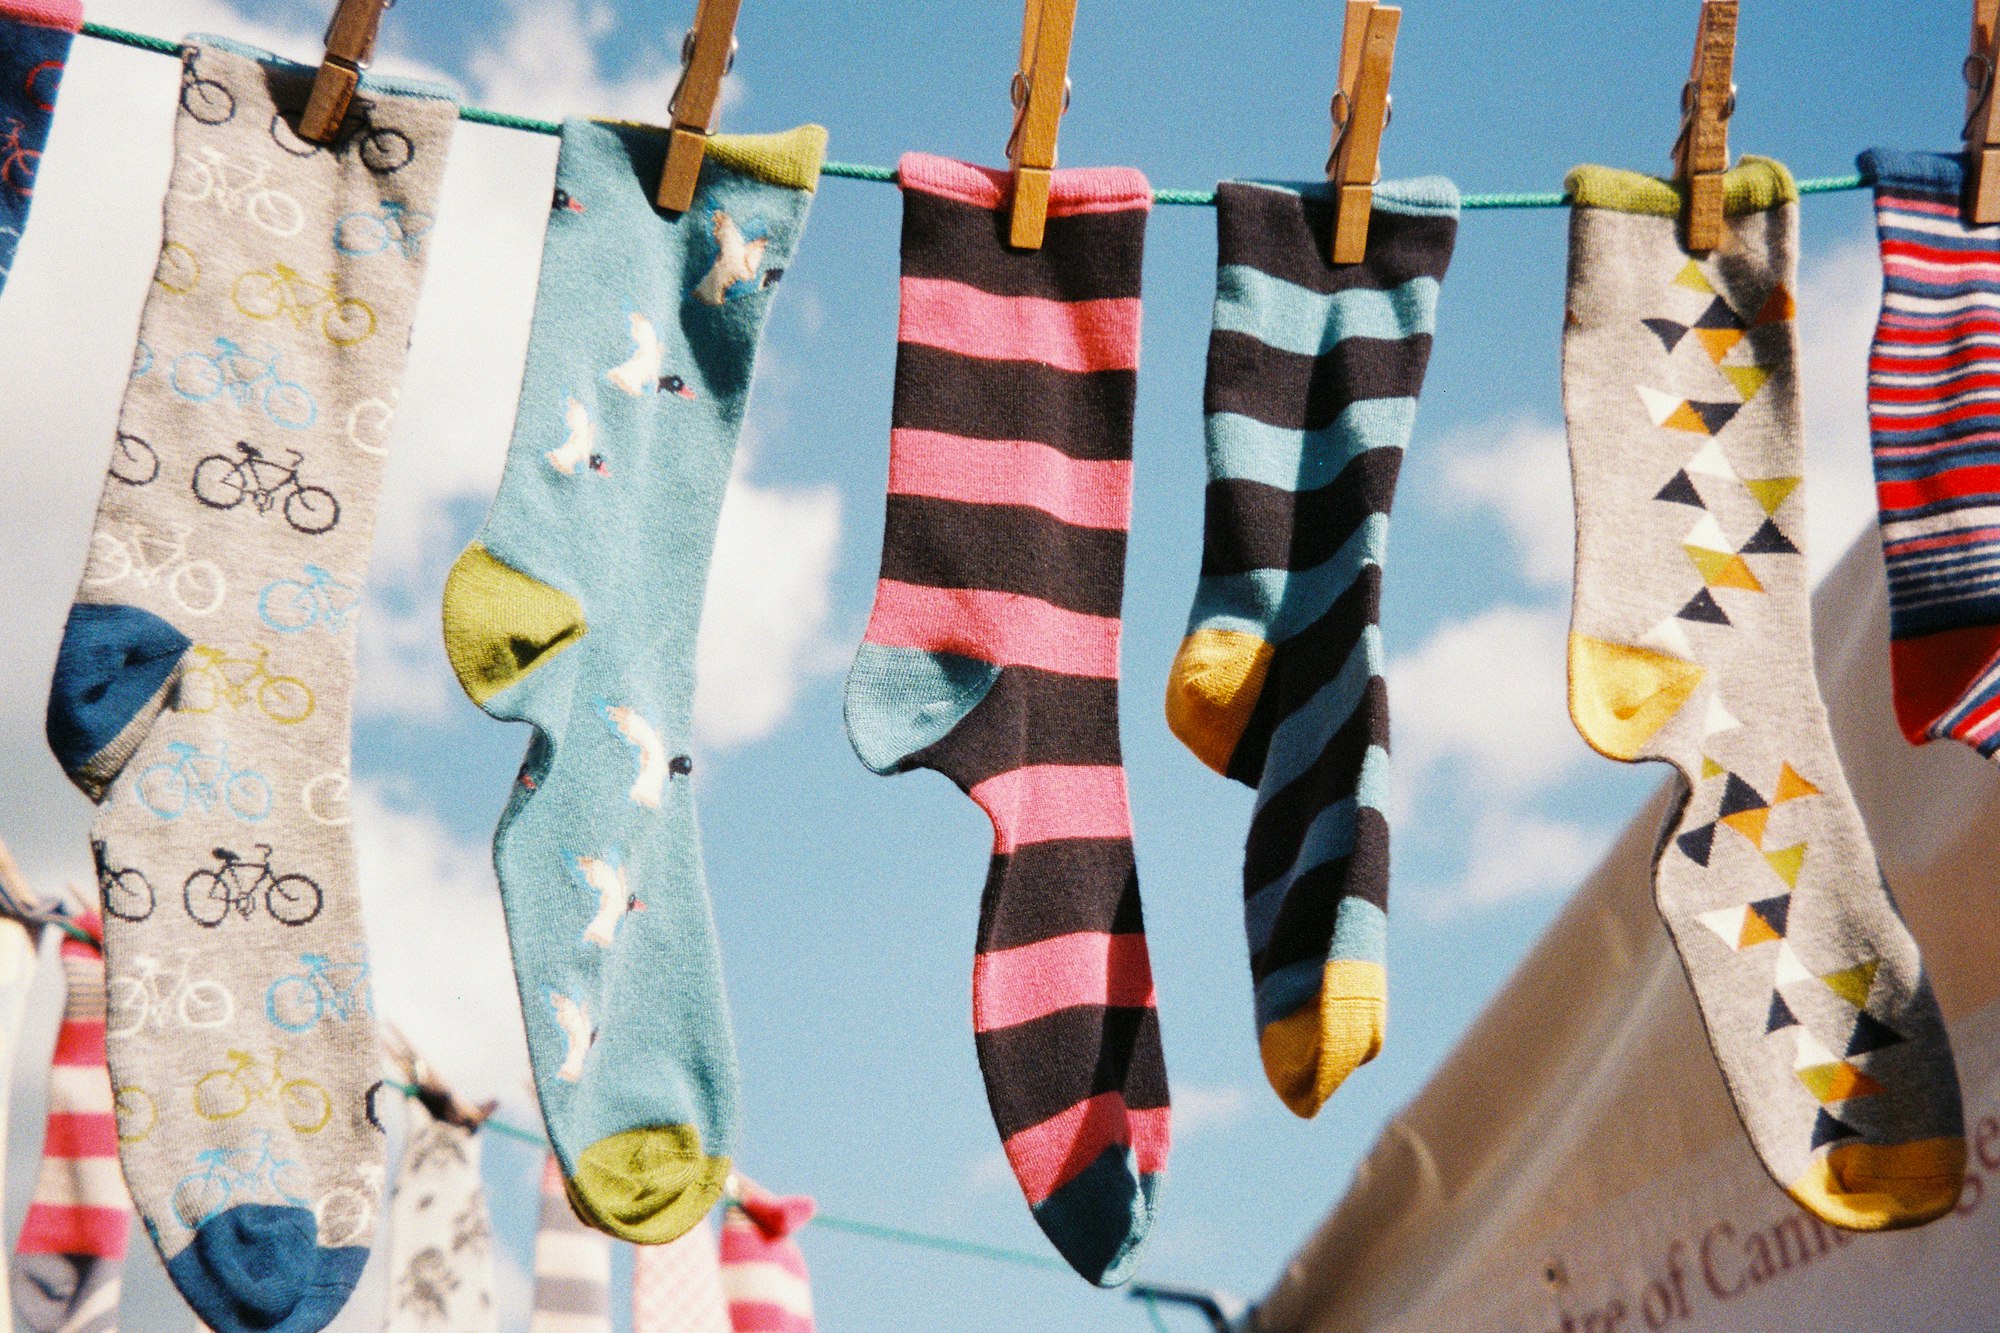 A row of different socks pegged on a line. Shot on film.